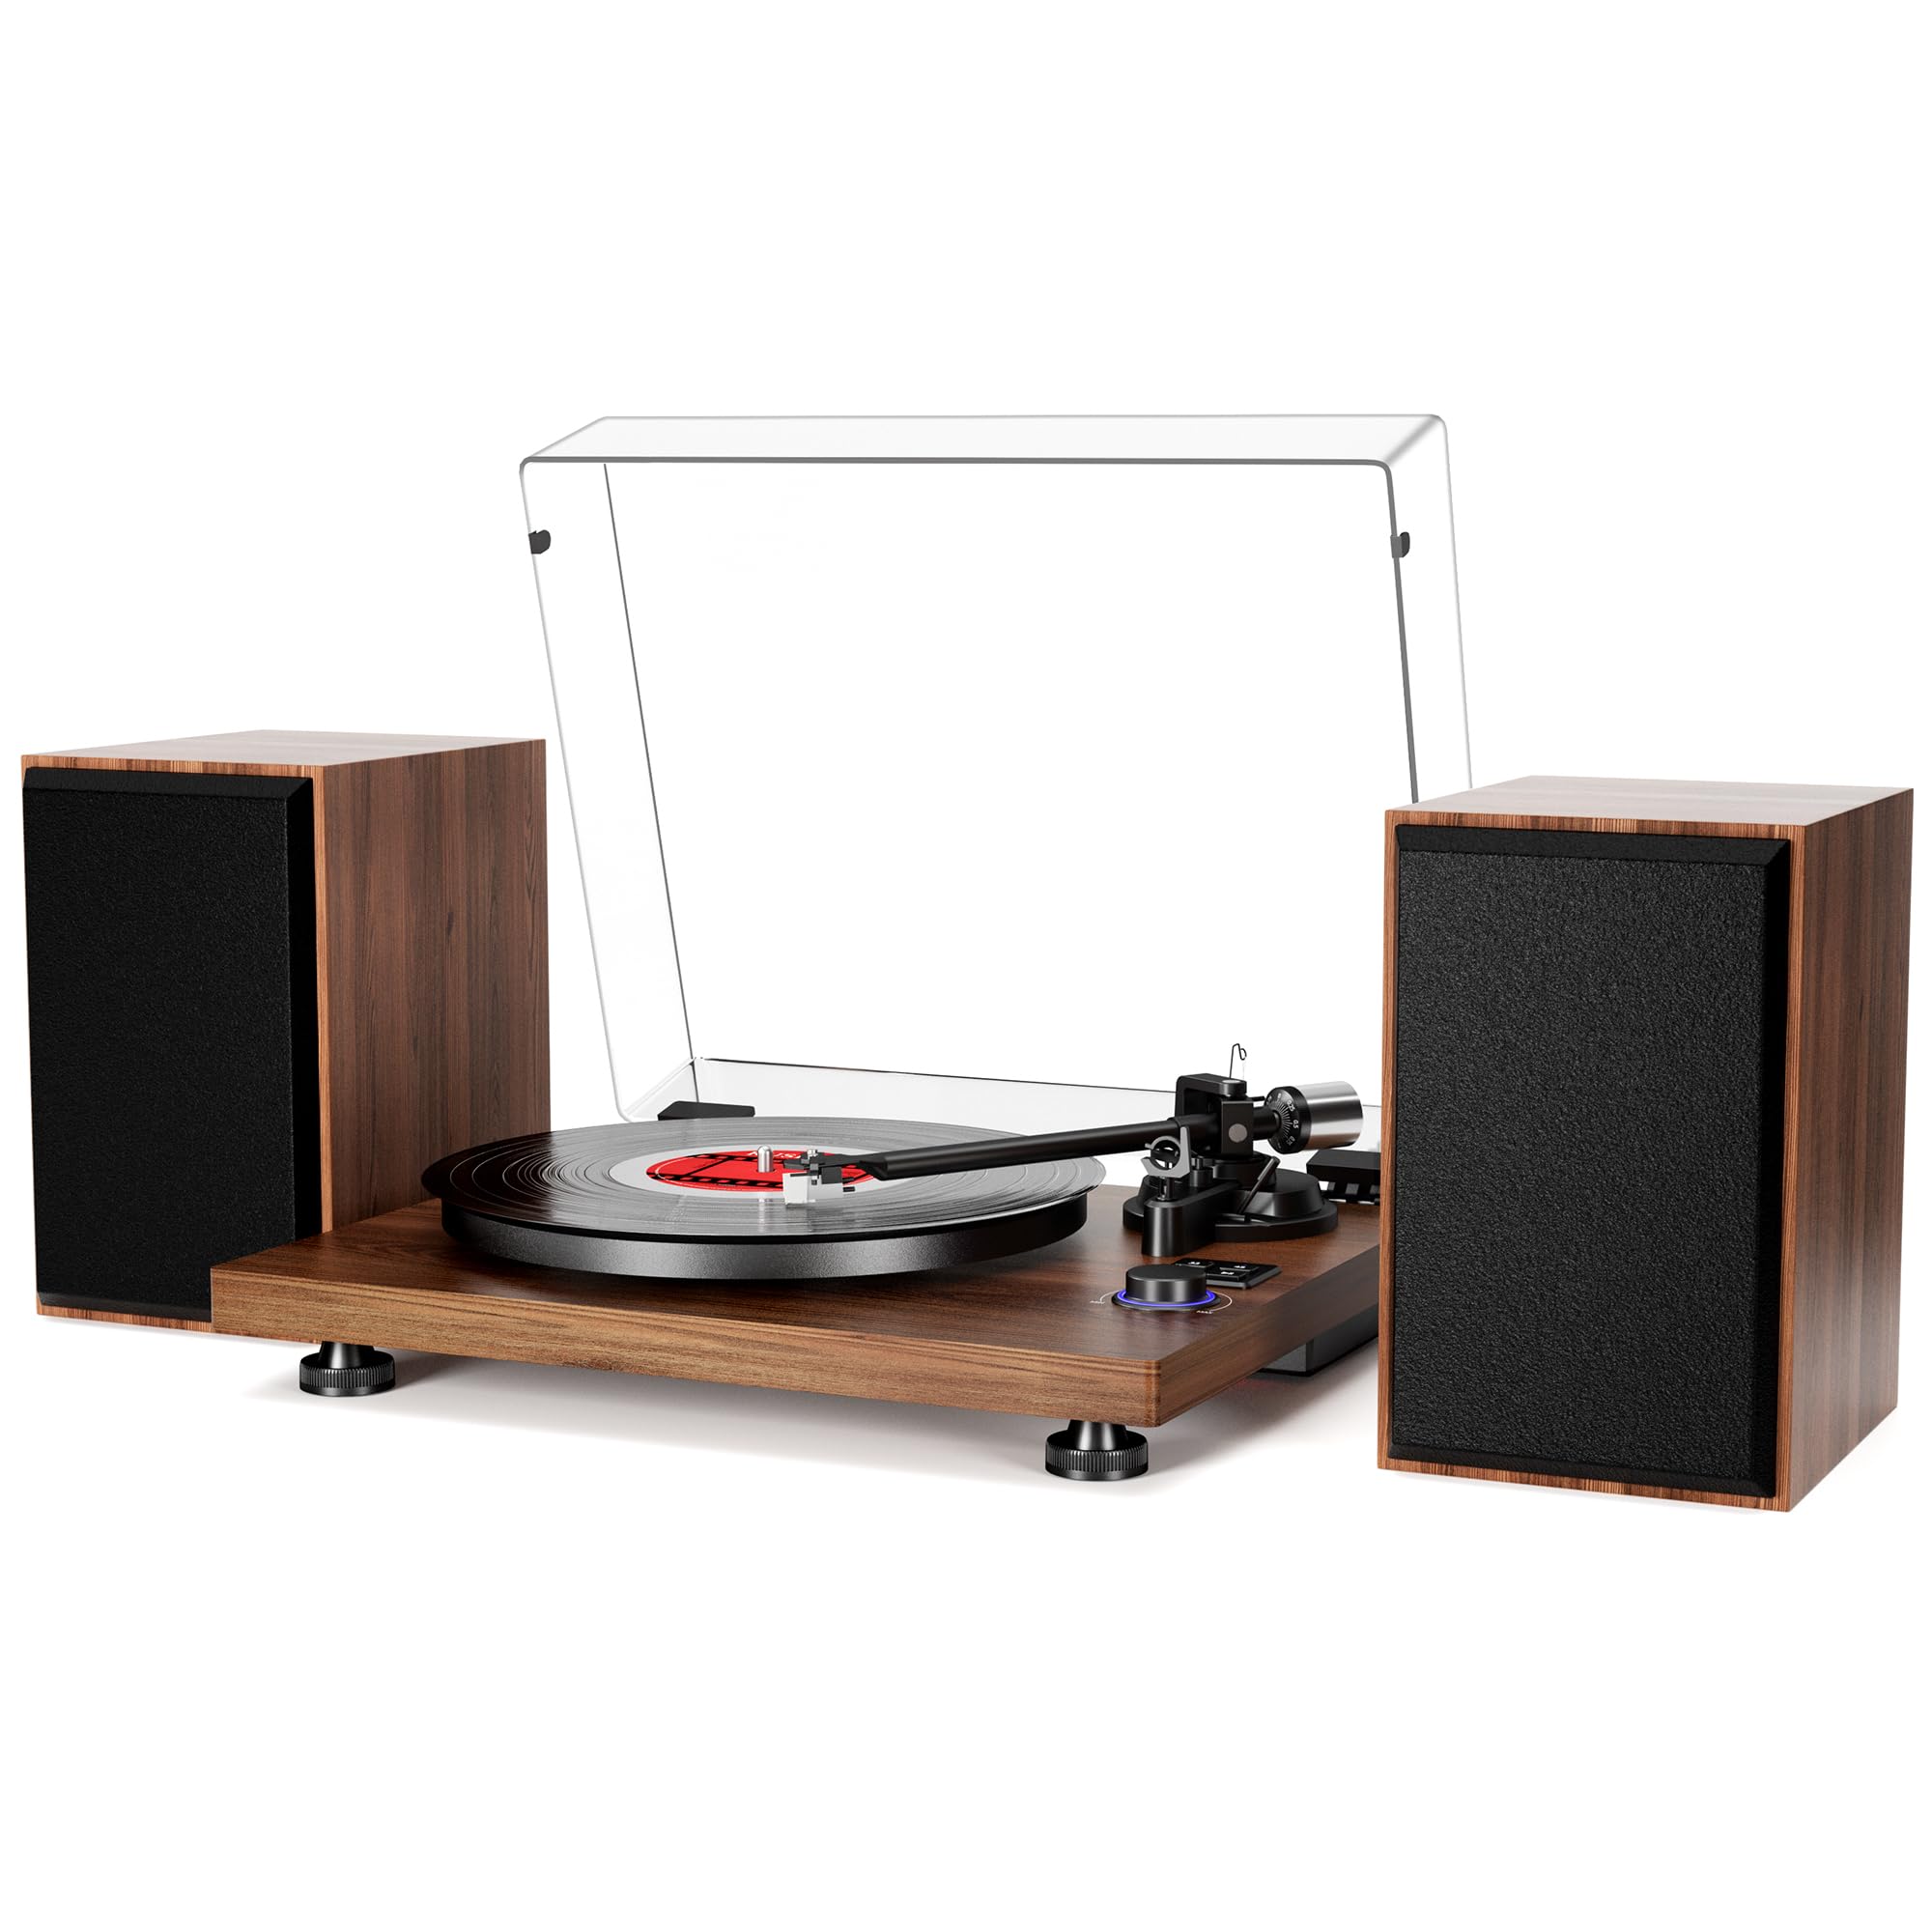 Record Player for Vinyl with Speakers,Bluetooth Turntable for Vinyl Records with 36W HiFi Stereo Speakers,Magnetic Cartridge & Adjustable Counter Weight and Anti-Skating,RCA Output